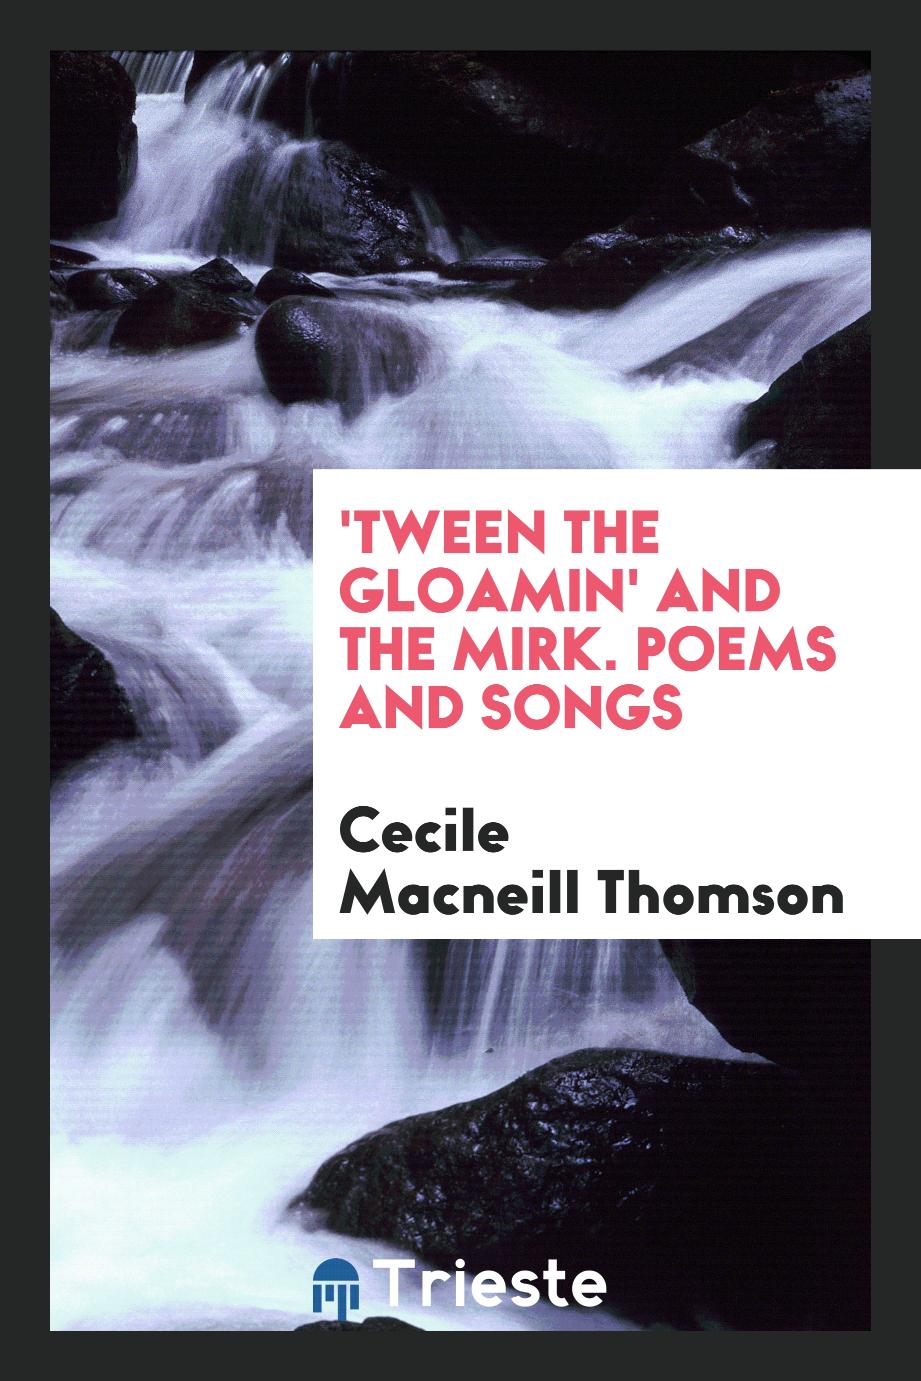 'Tween the Gloamin' and the Mirk. Poems and Songs